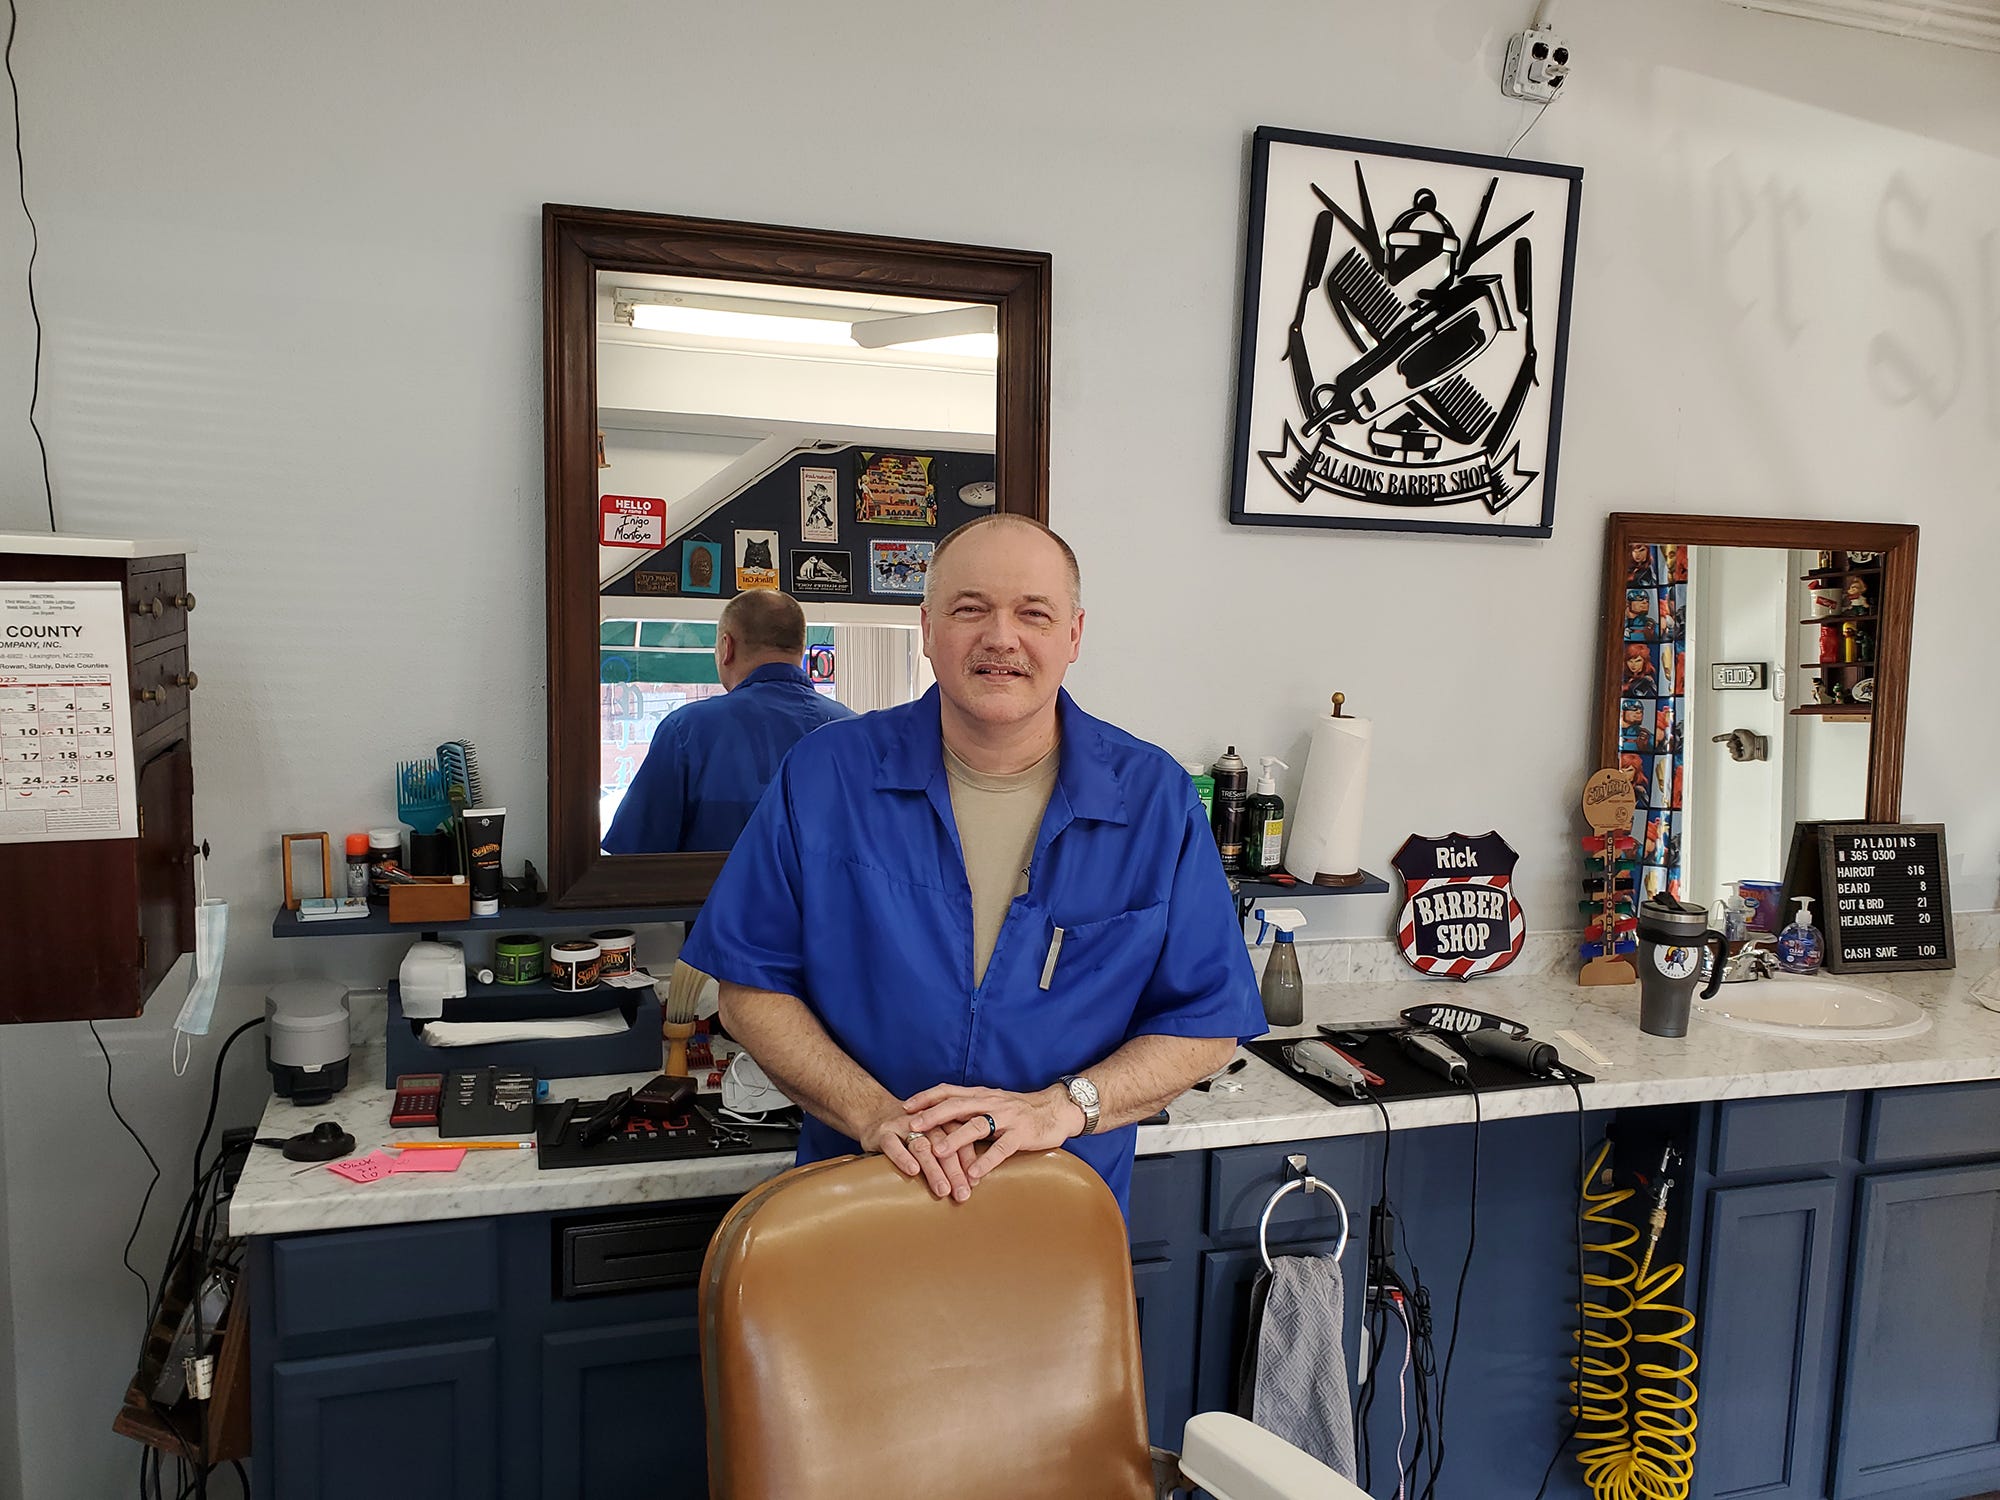 A Lexington barber makes leap, moving his barbershop to downtown area